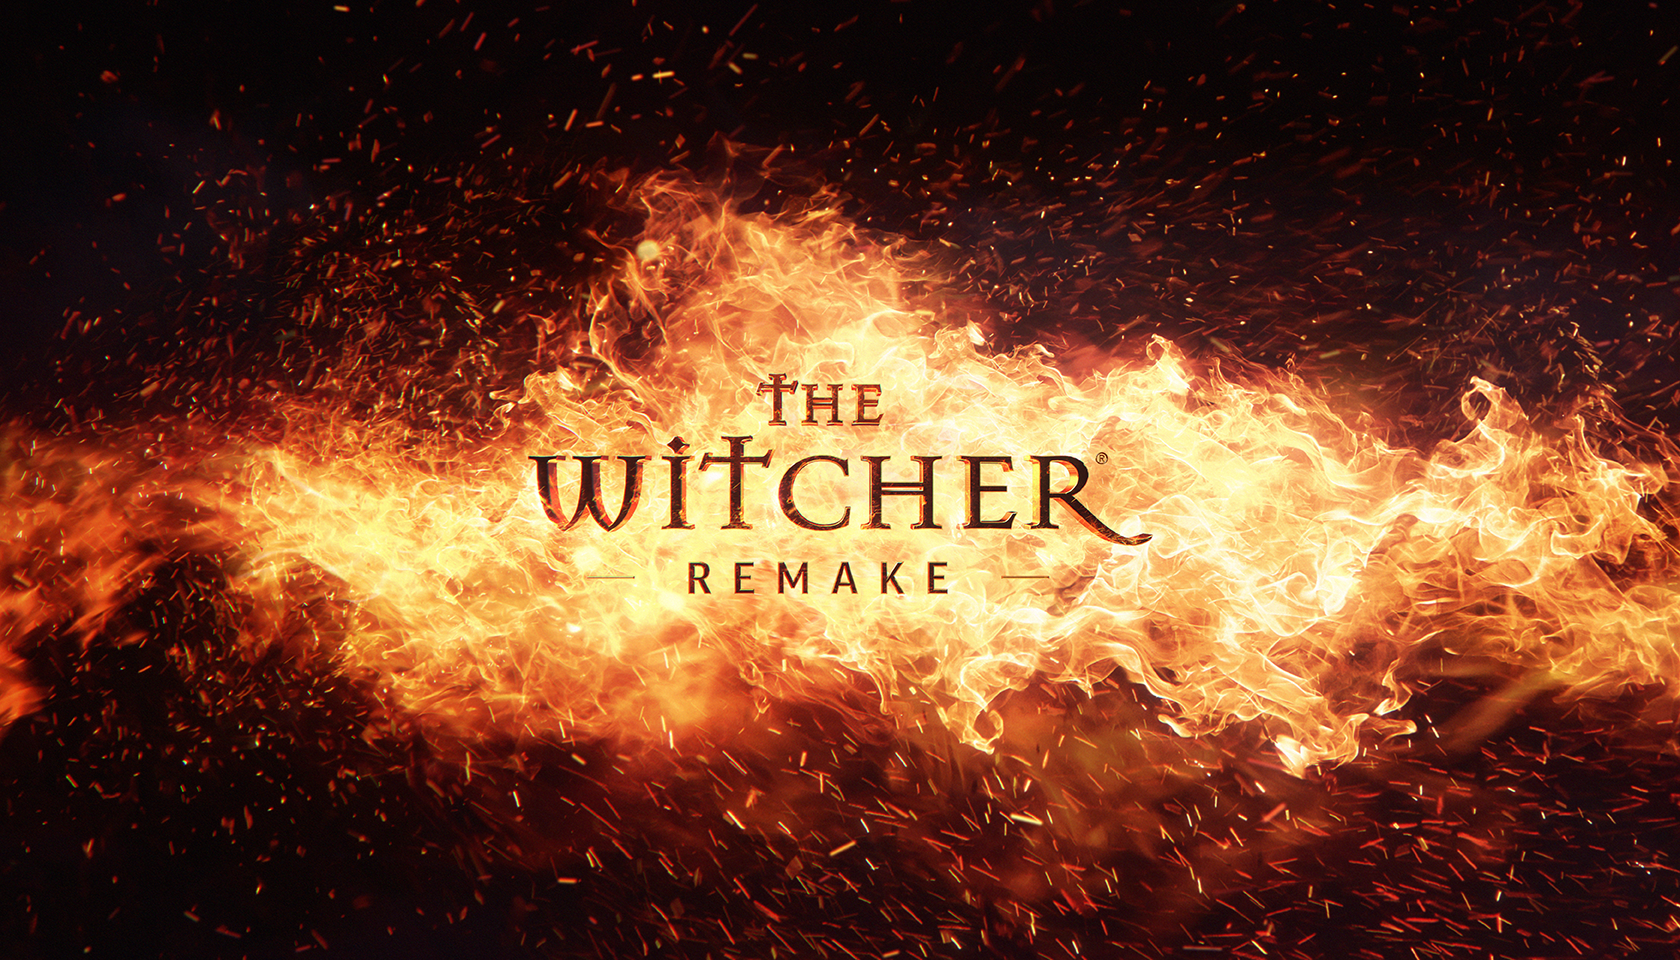 File:The Witcher 2; Assassins of Kings Enhanced Edition logo.png -  Wikimedia Commons